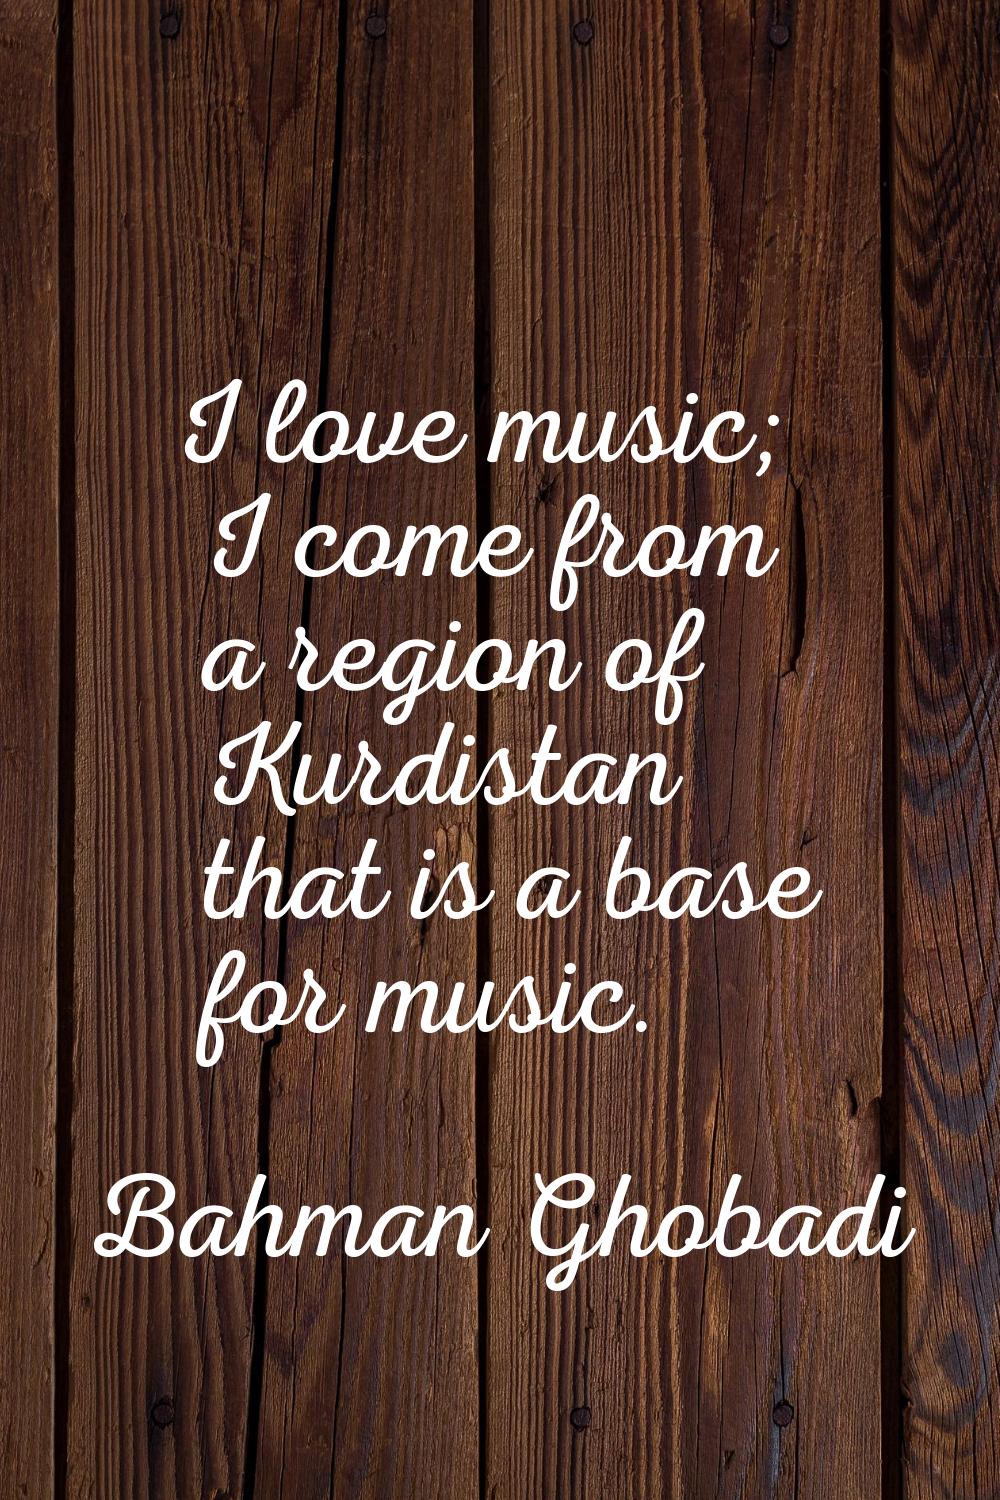 I love music; I come from a region of Kurdistan that is a base for music.